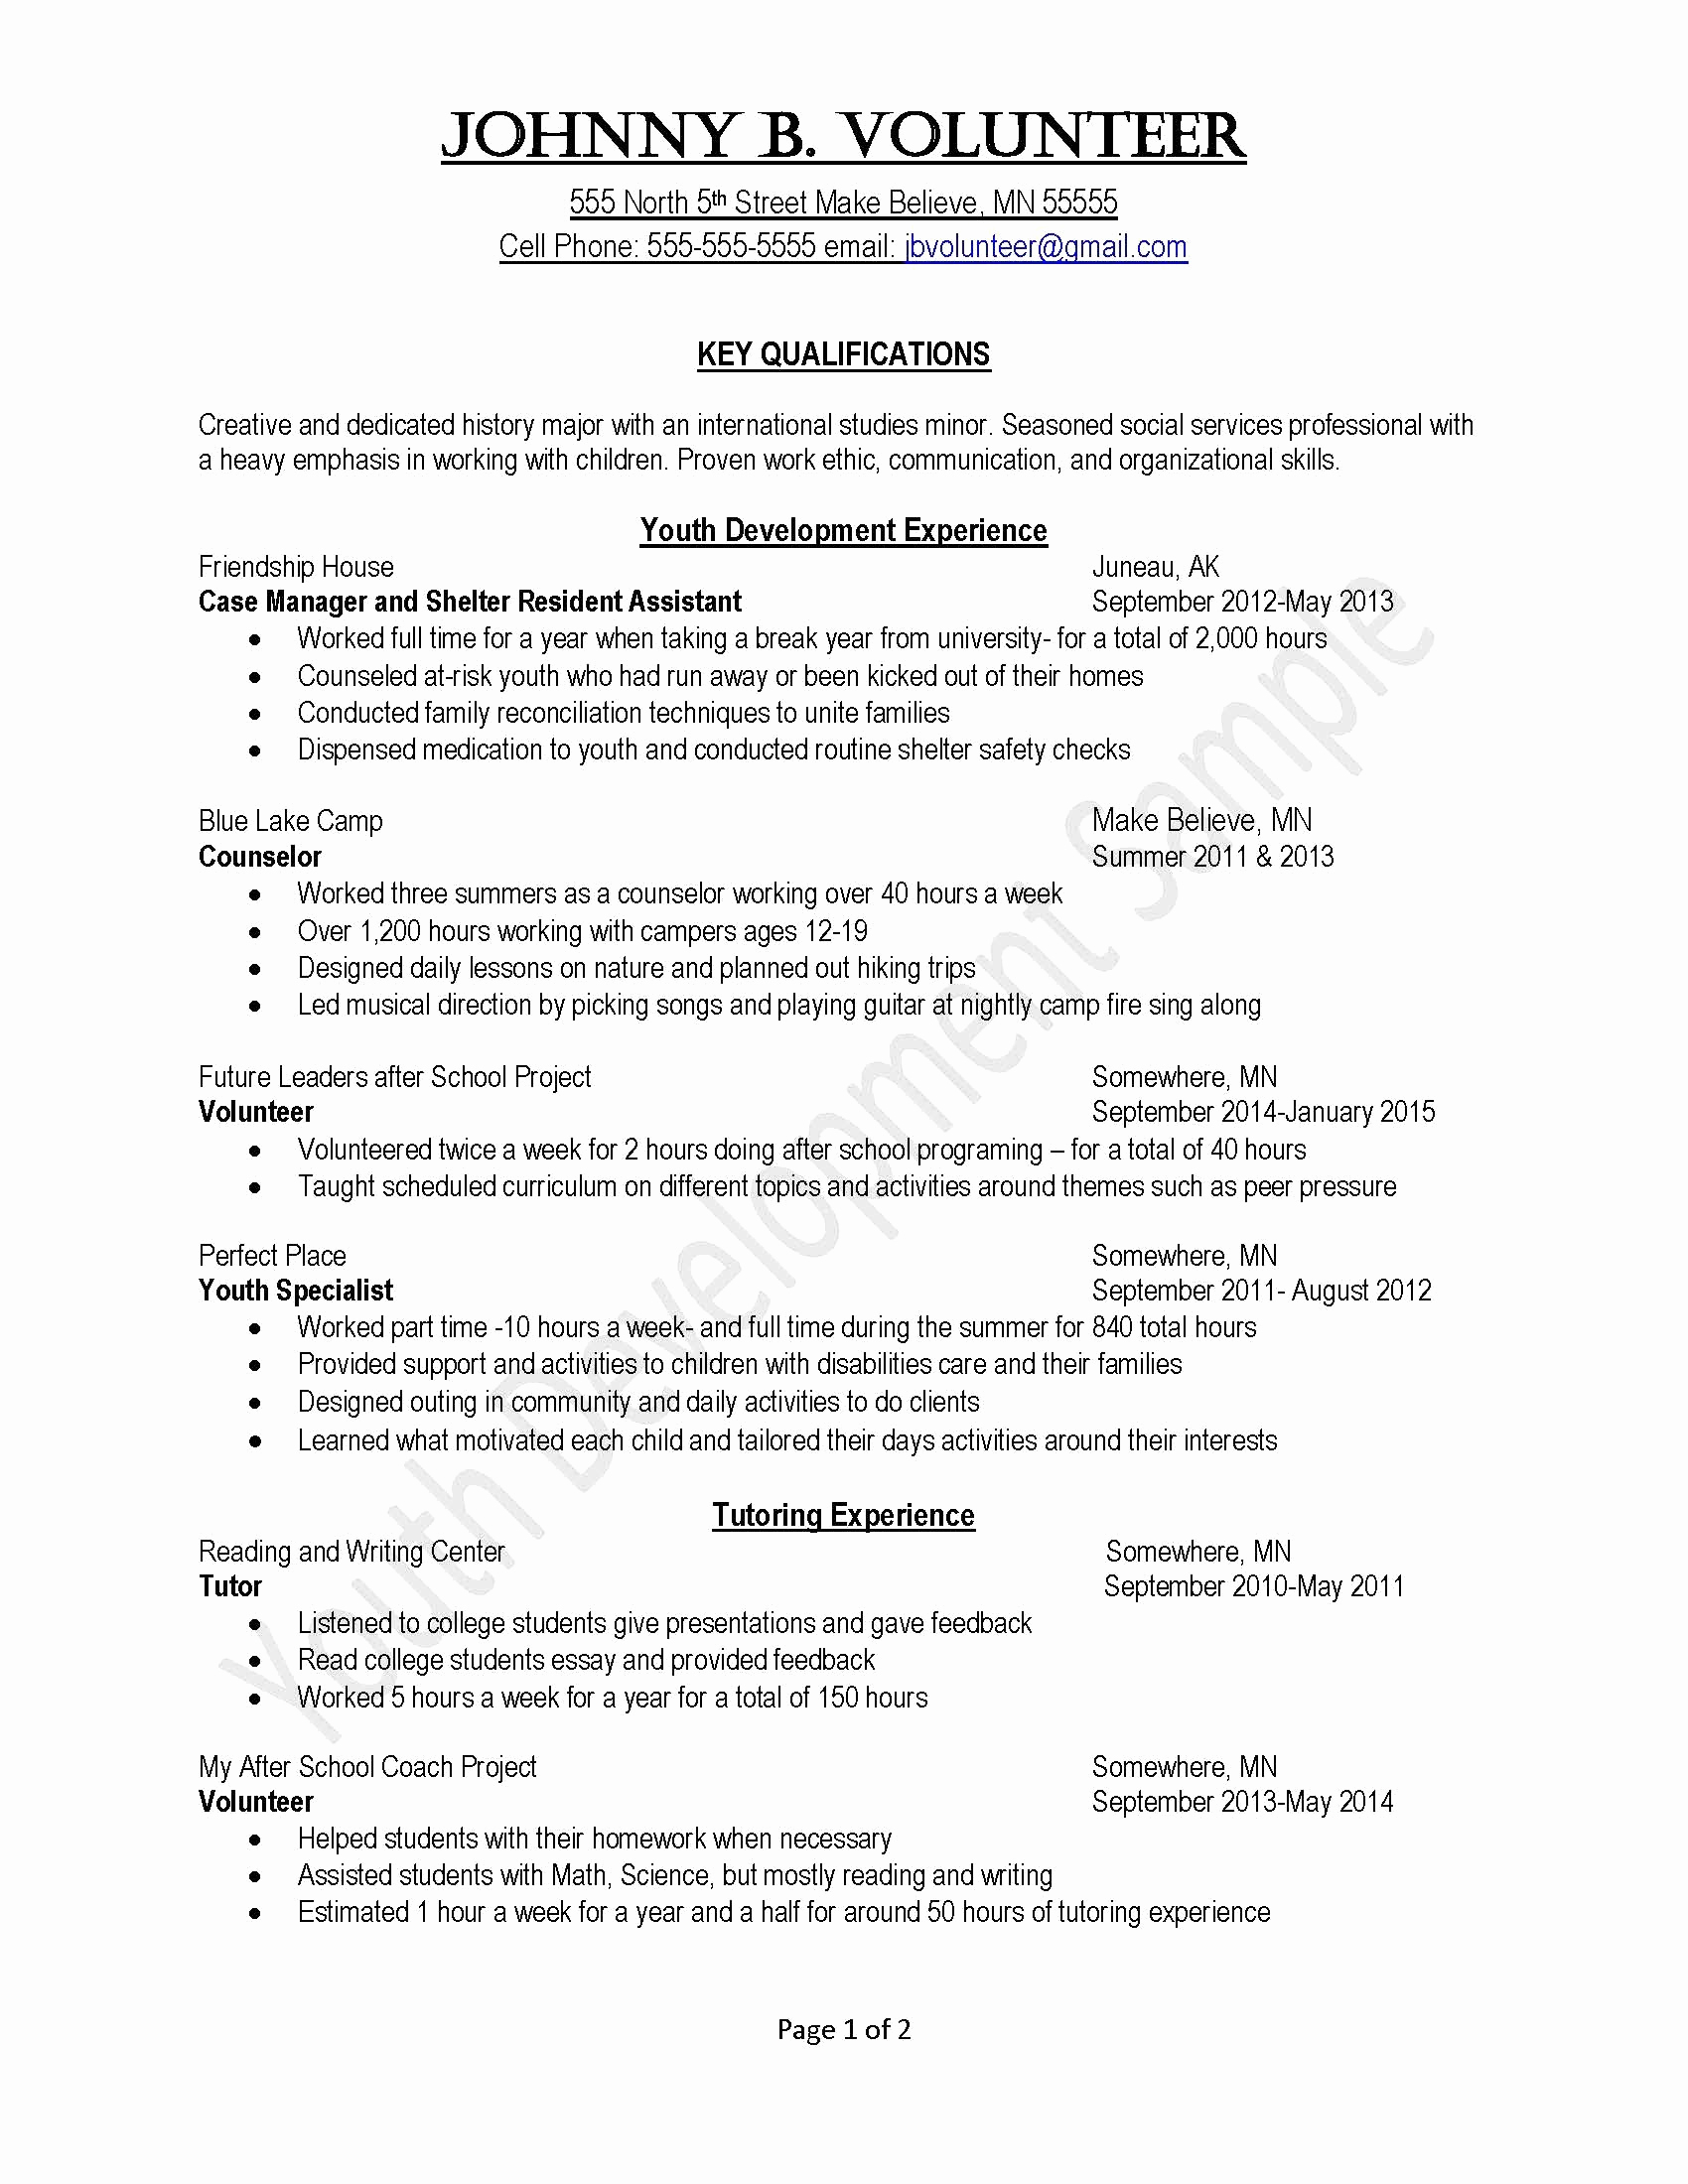 Cover Letter Template Microsoft Word 2010 - Microsoft Word 2010 Resume Template Lovely Resume Templates Word